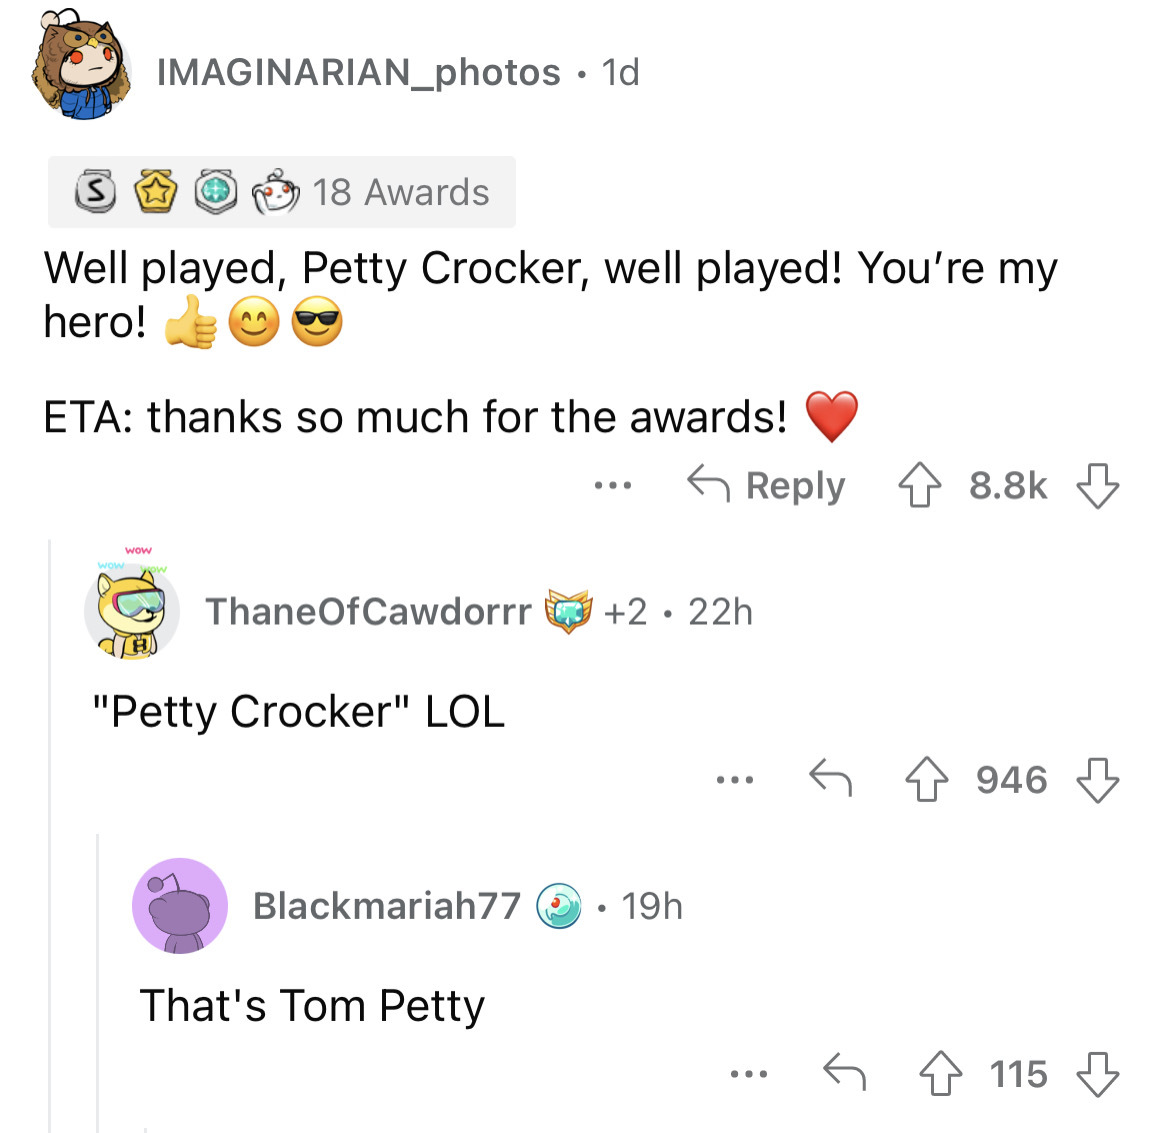 document - 18 Awards Well played, Petty Crocker, well played! You're my hero! IMAGINARIAN_photos. 1d Eta thanks so much for the awards! wow wow "Petty Crocker" Lol ThaneOfCawdorrr 2 22h Blackmariah77 ... That's Tom Petty 19h ... ... 946 115